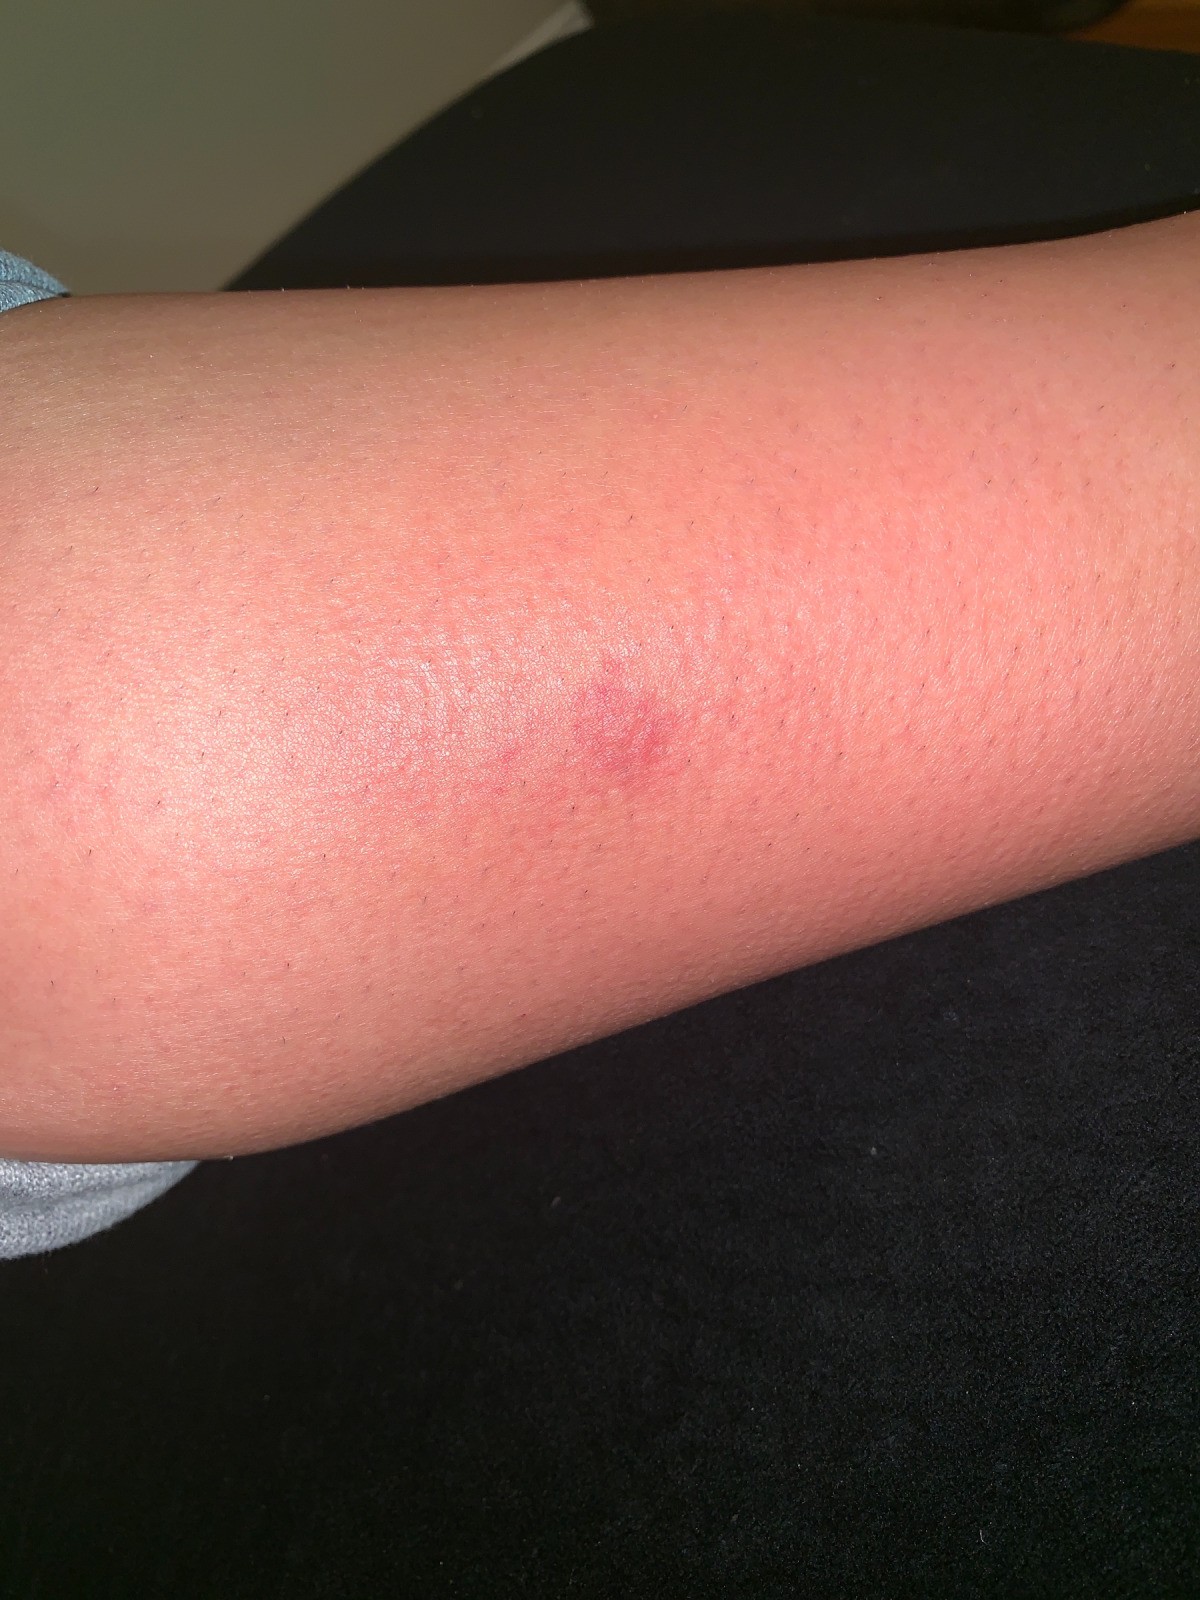 bug bites that itch in evening